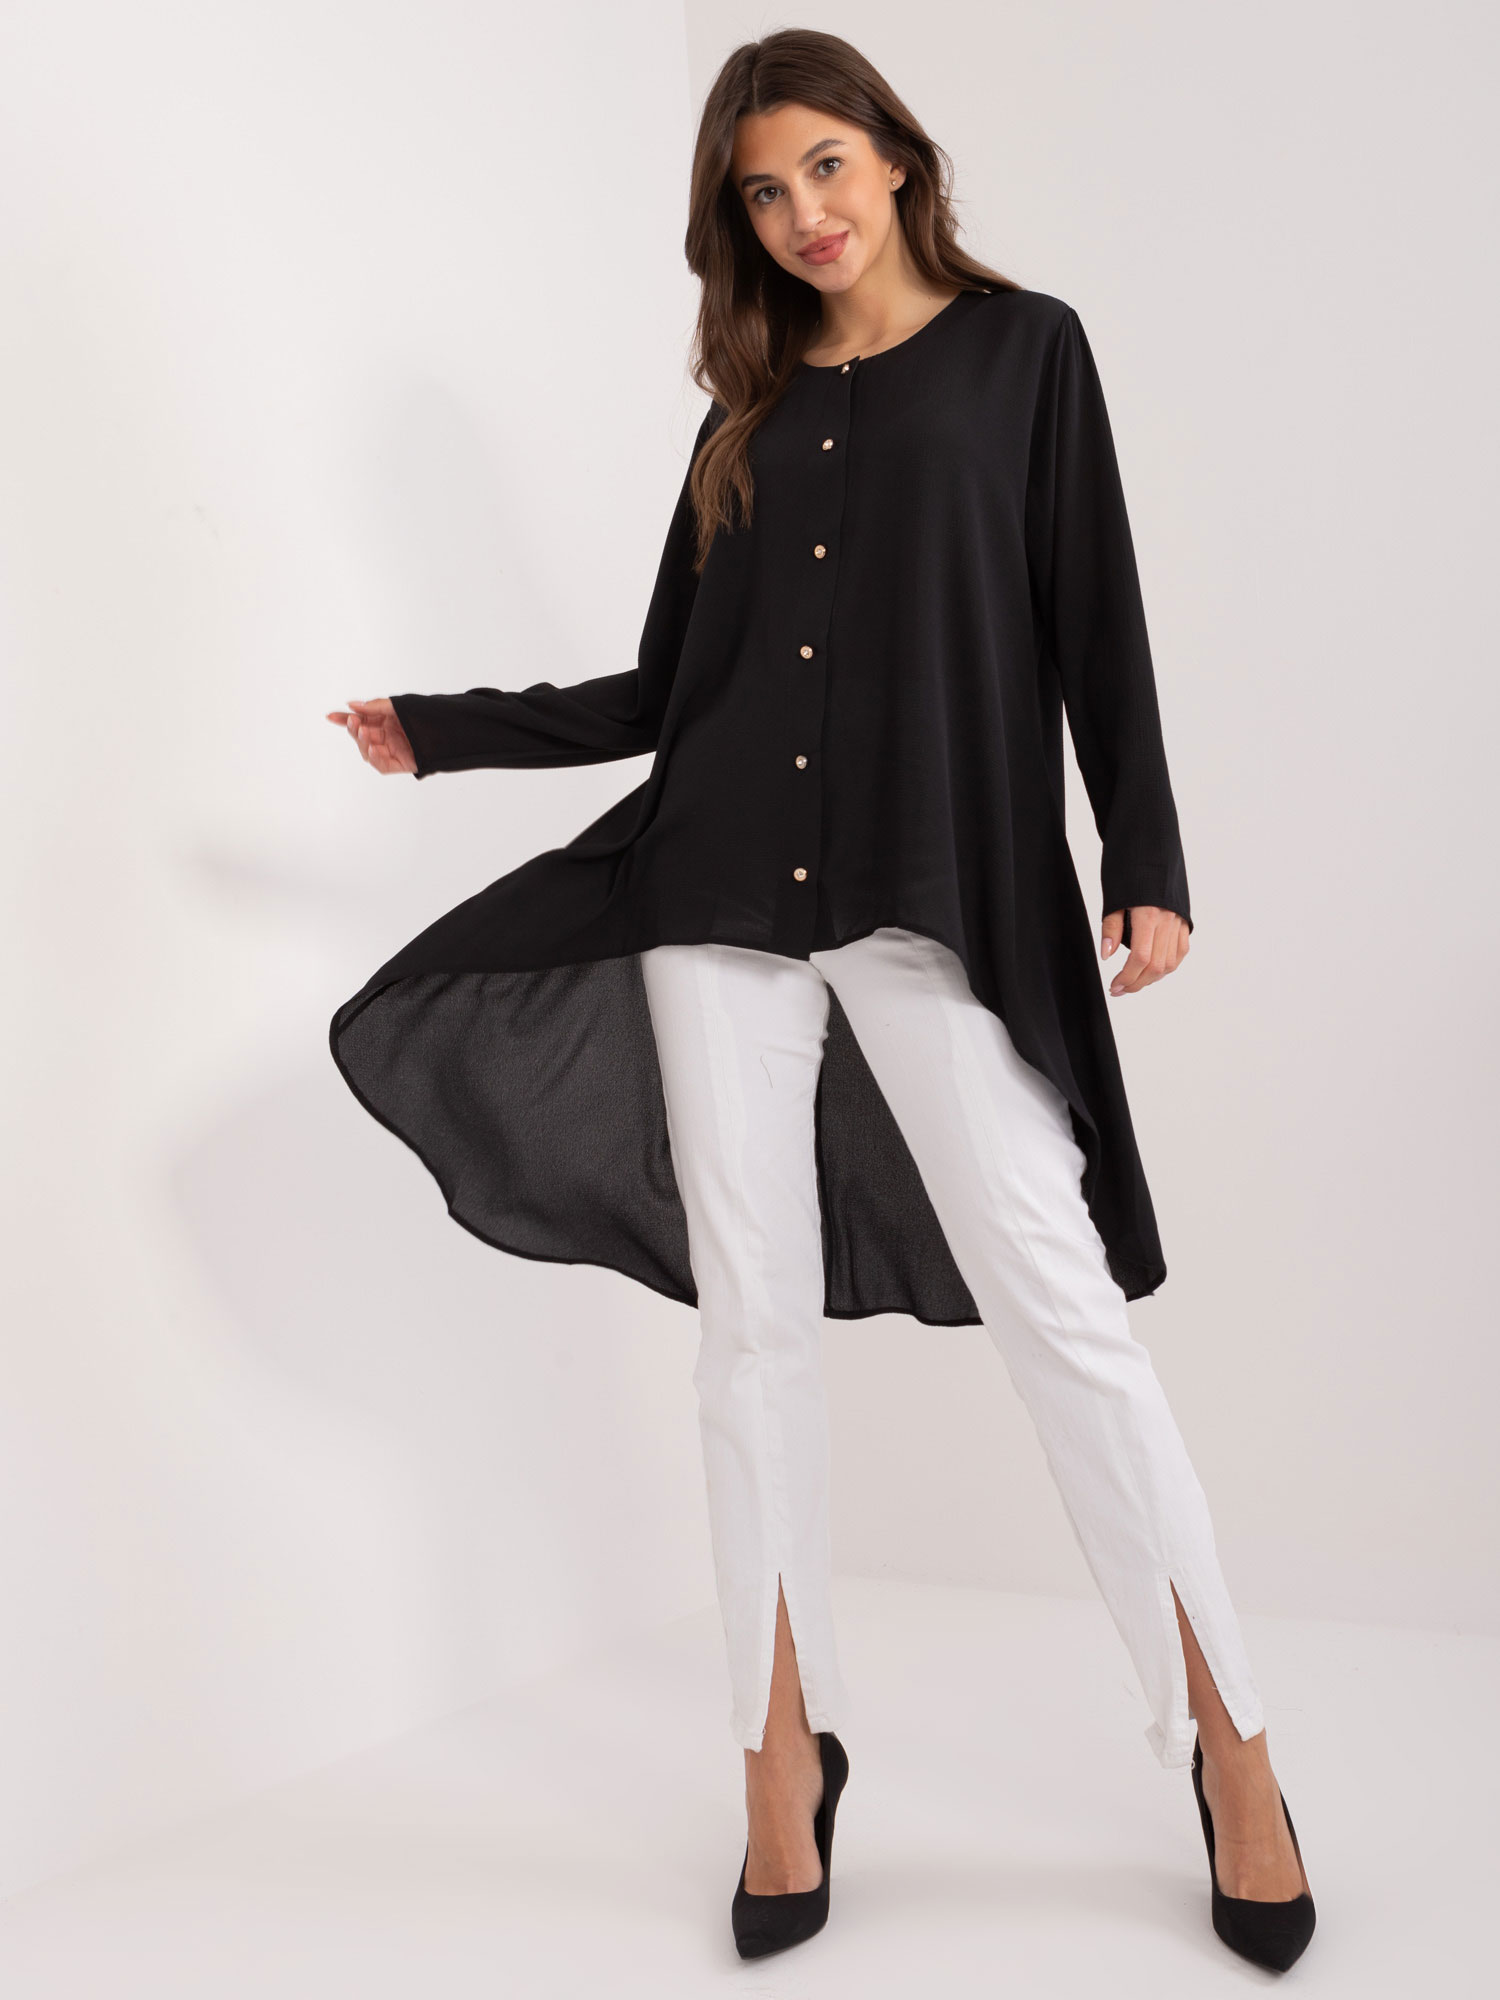 Black long shirt with decorative buttons